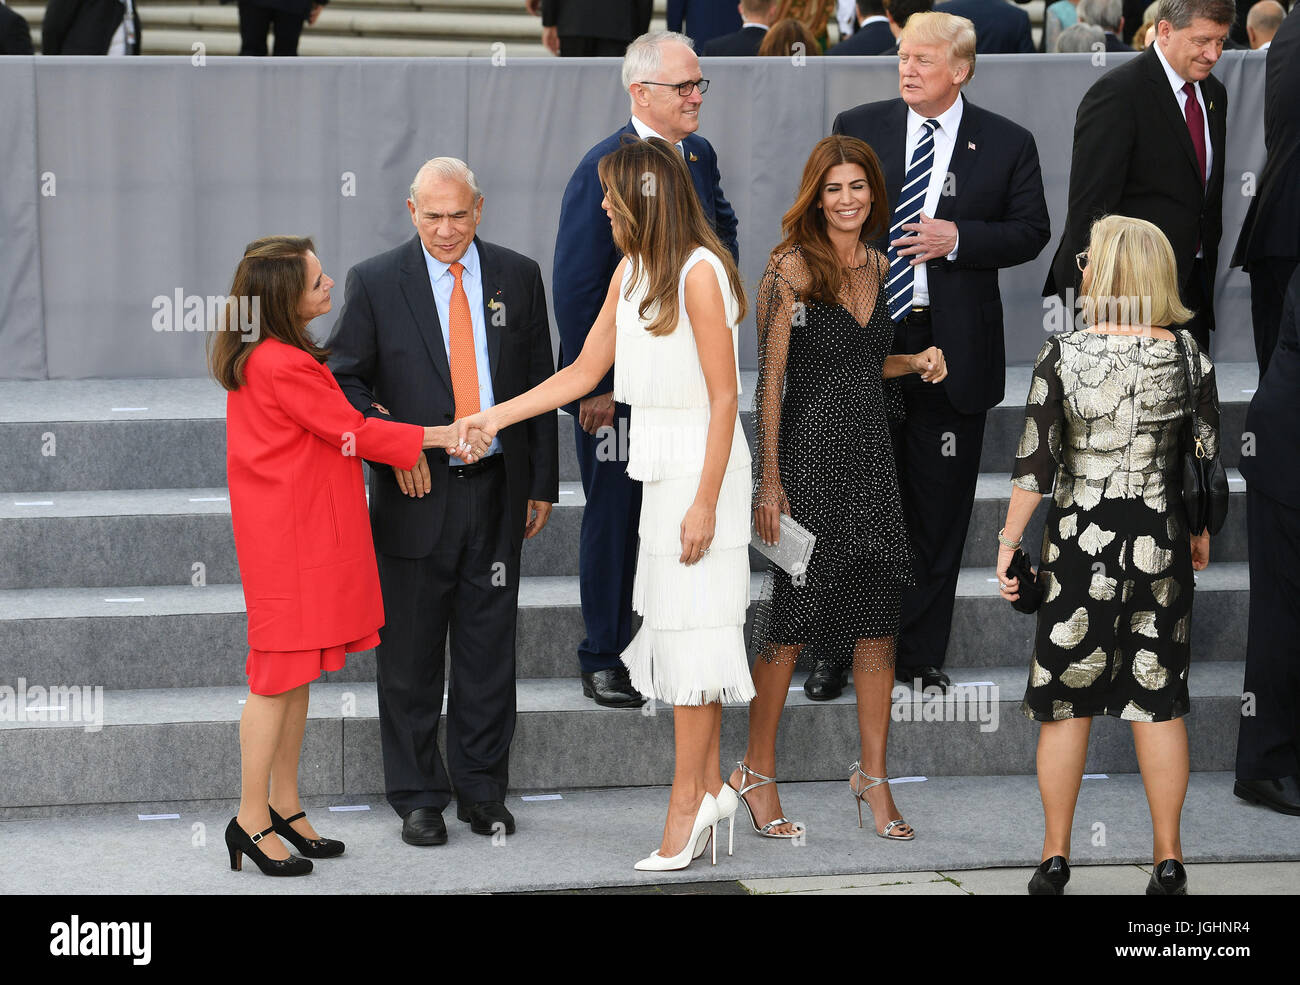 Melania Trump greets Jos&eacute; &Aacute;ngel Gurr&iacute;a (second left)  and his wife Dr. Lulu Quintana (left) as G20 leaders and their spouses  arrive to attend a concert at the Elbphilharmonie concert hall in